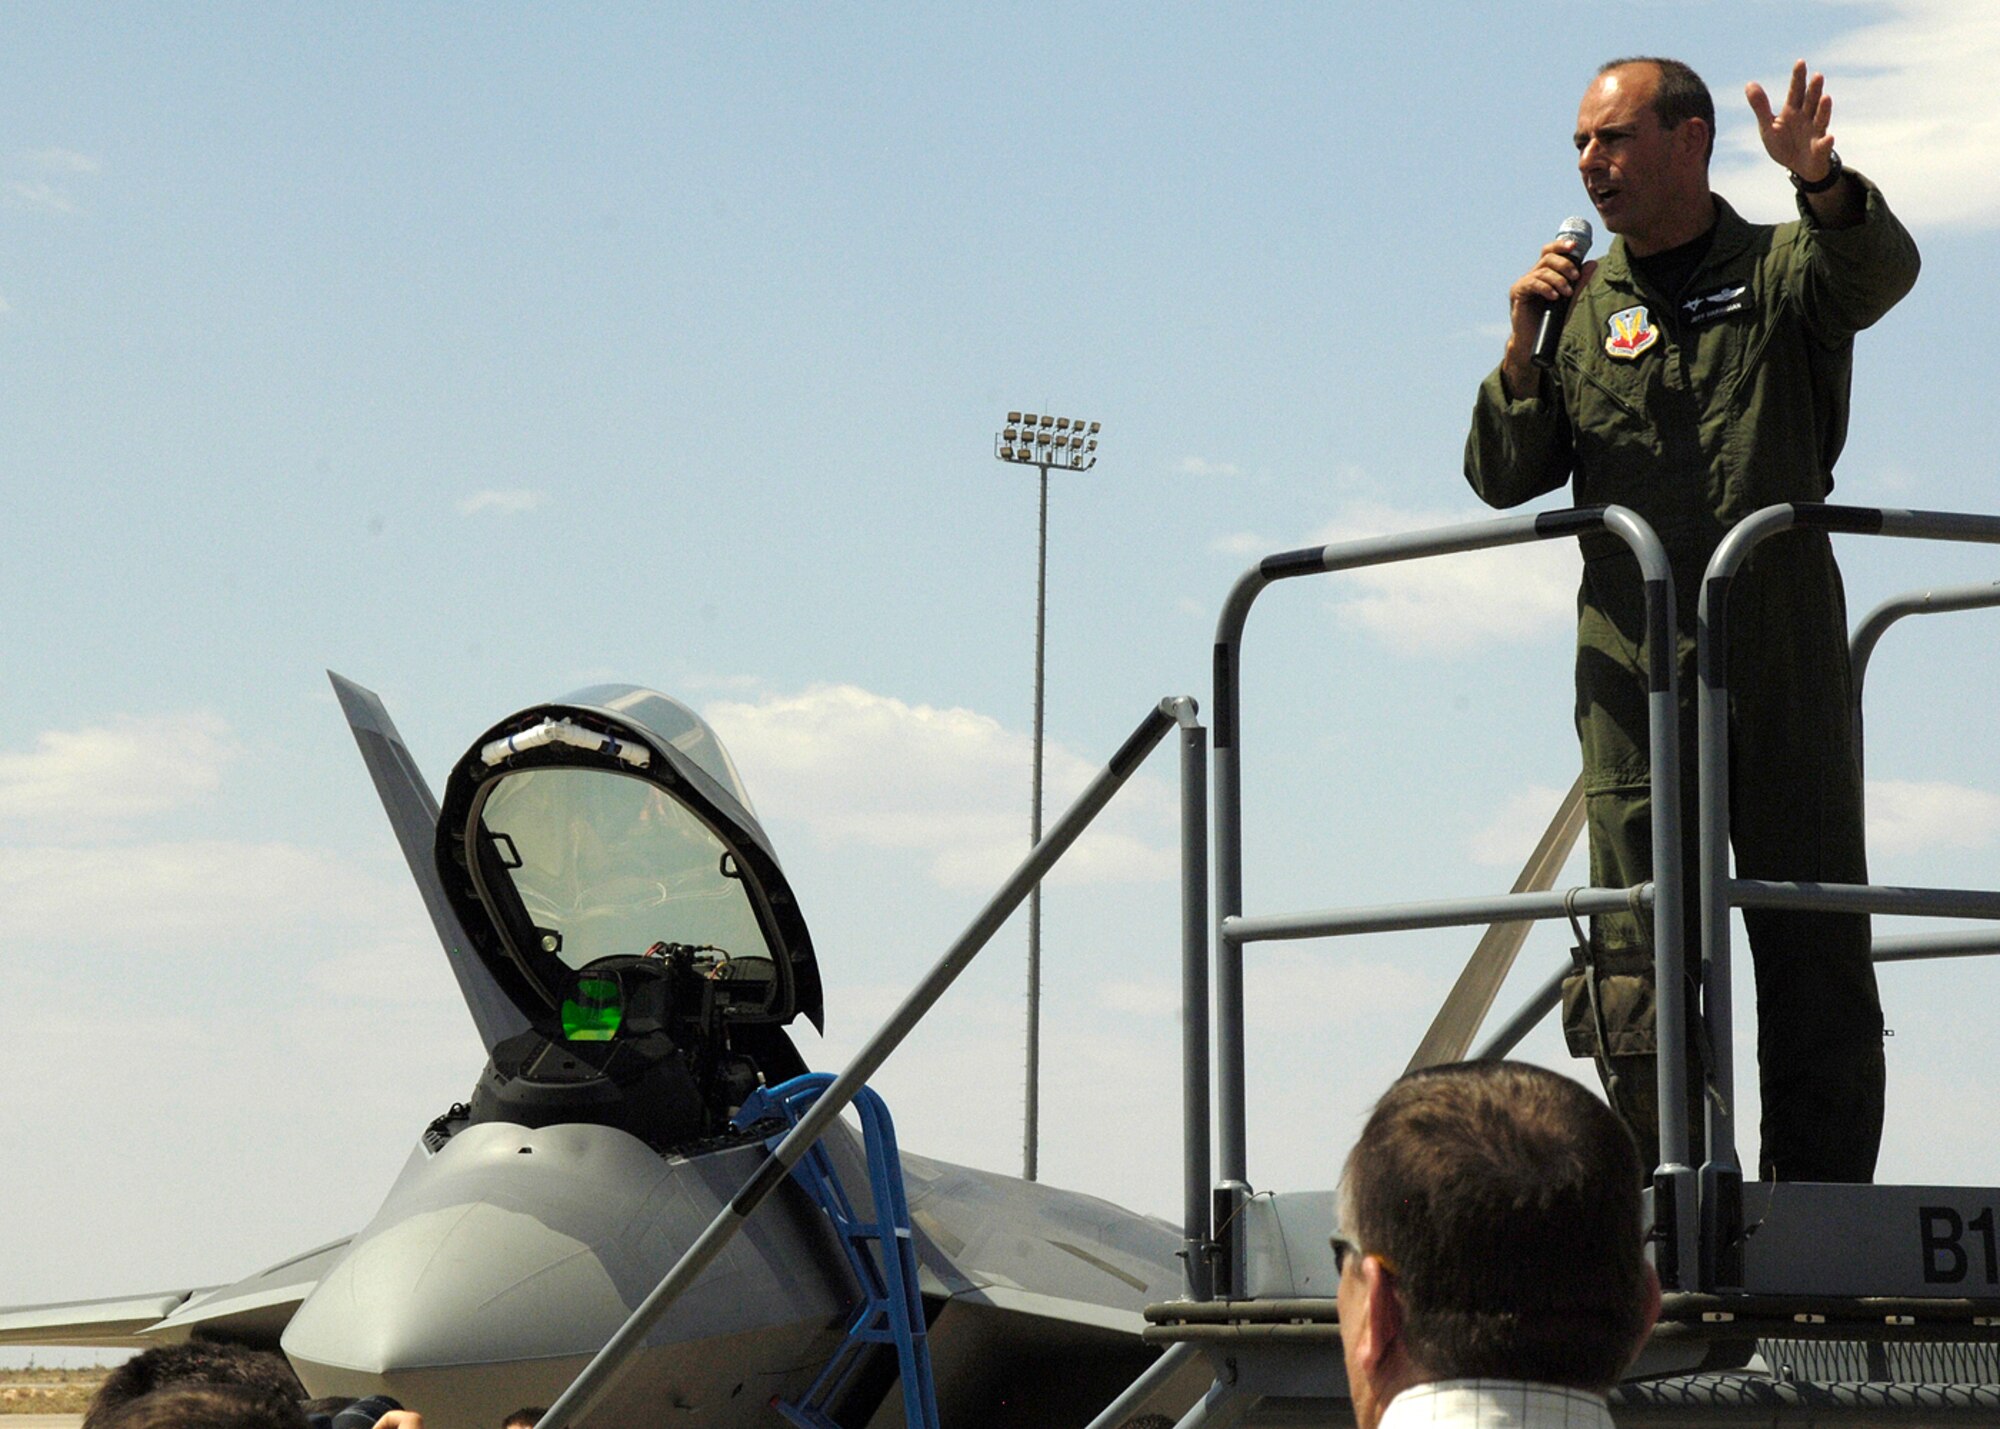 Col. Jeff ?Cobra? Harrigian, 49th Fighter Wing commander, speaks briefly after flying in one of the first two F-22A Raptors to Holloman Air Force Base, N.M., at Hangar 301, June 2. The colonel thanked everyone for coming out and asked that the crowd give themselves round of applause for all the hard work they?ve done in preparation for the day. (U.S. Air Force photo/Airman 1st Class Michael Means)